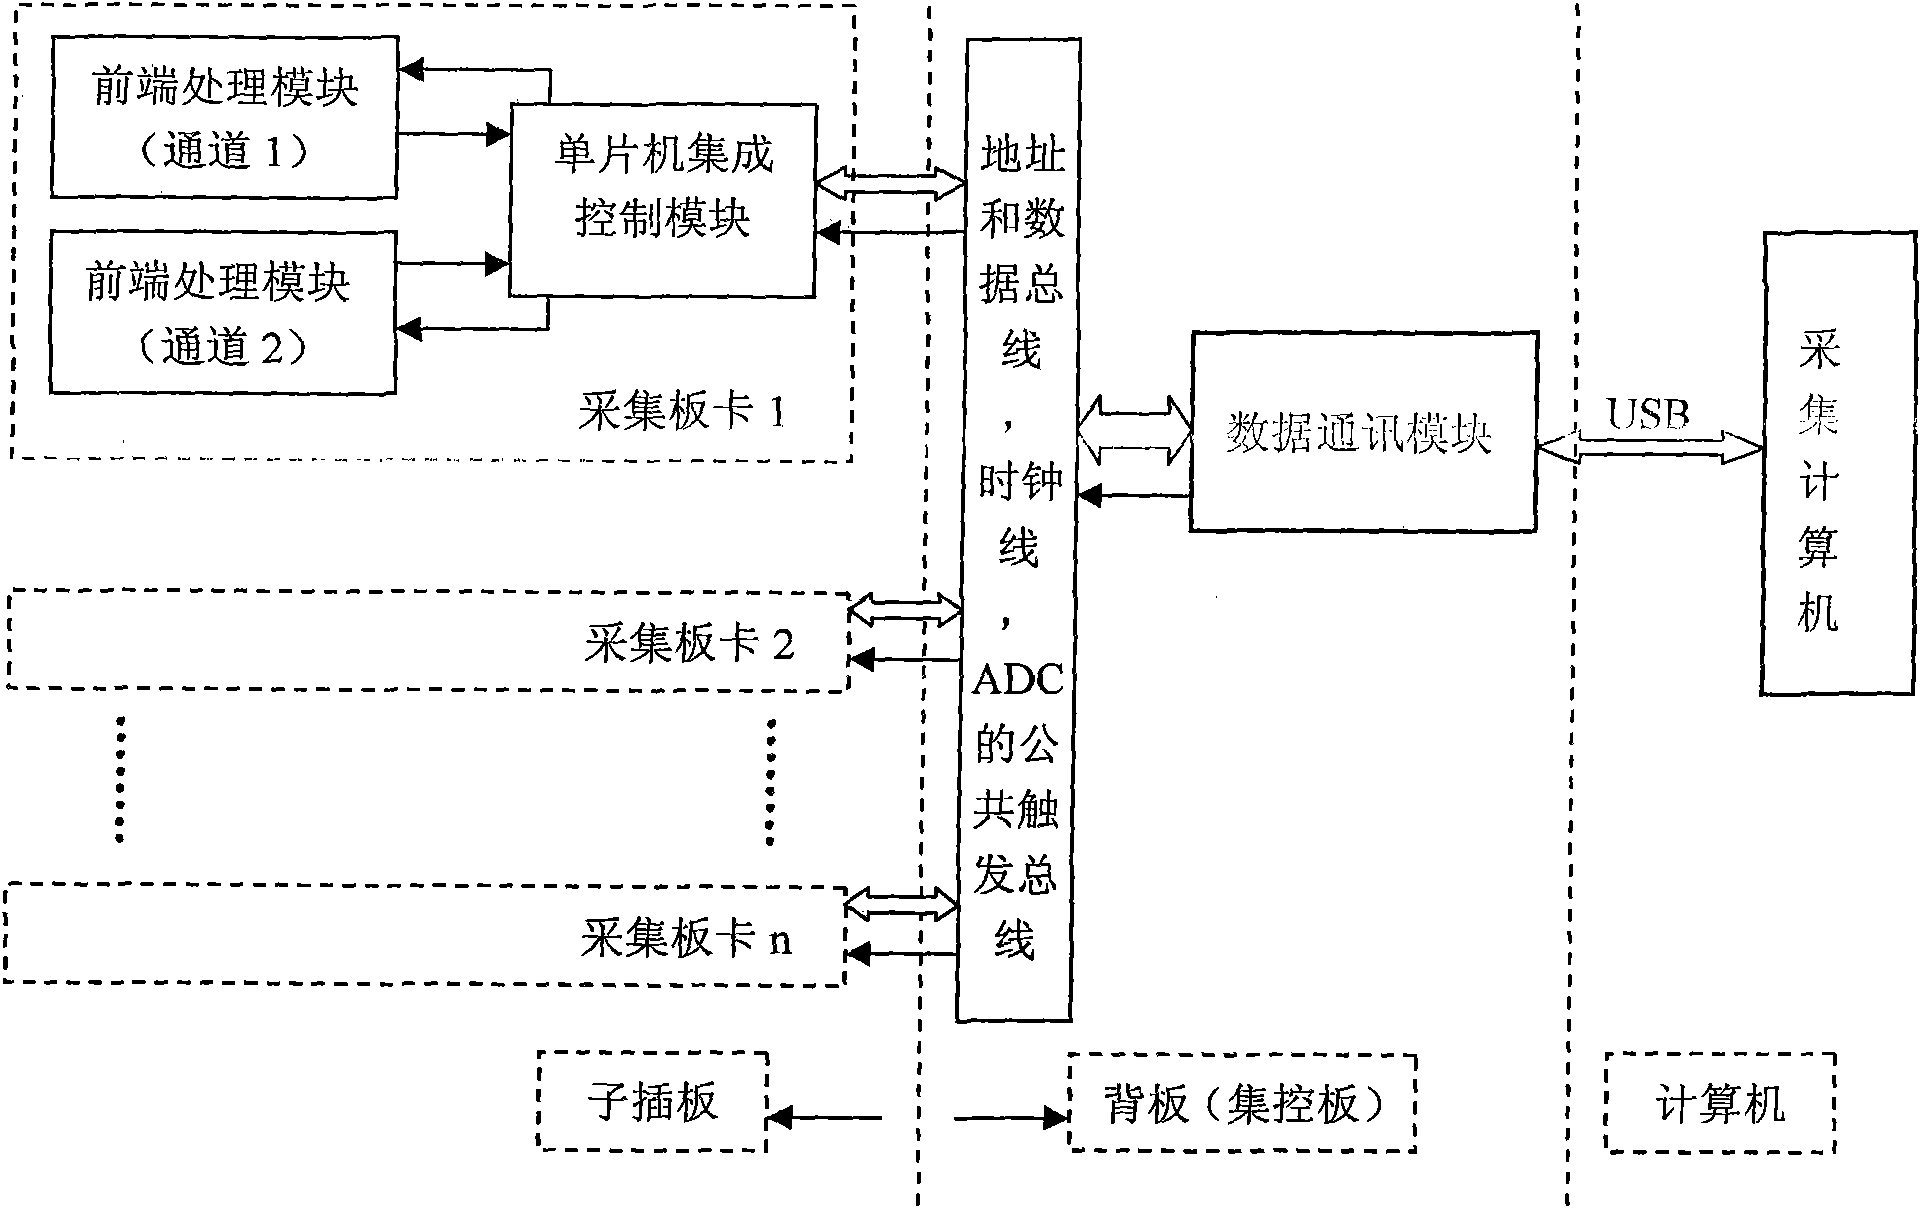 Multi-channel synchronous vibration data collecting system